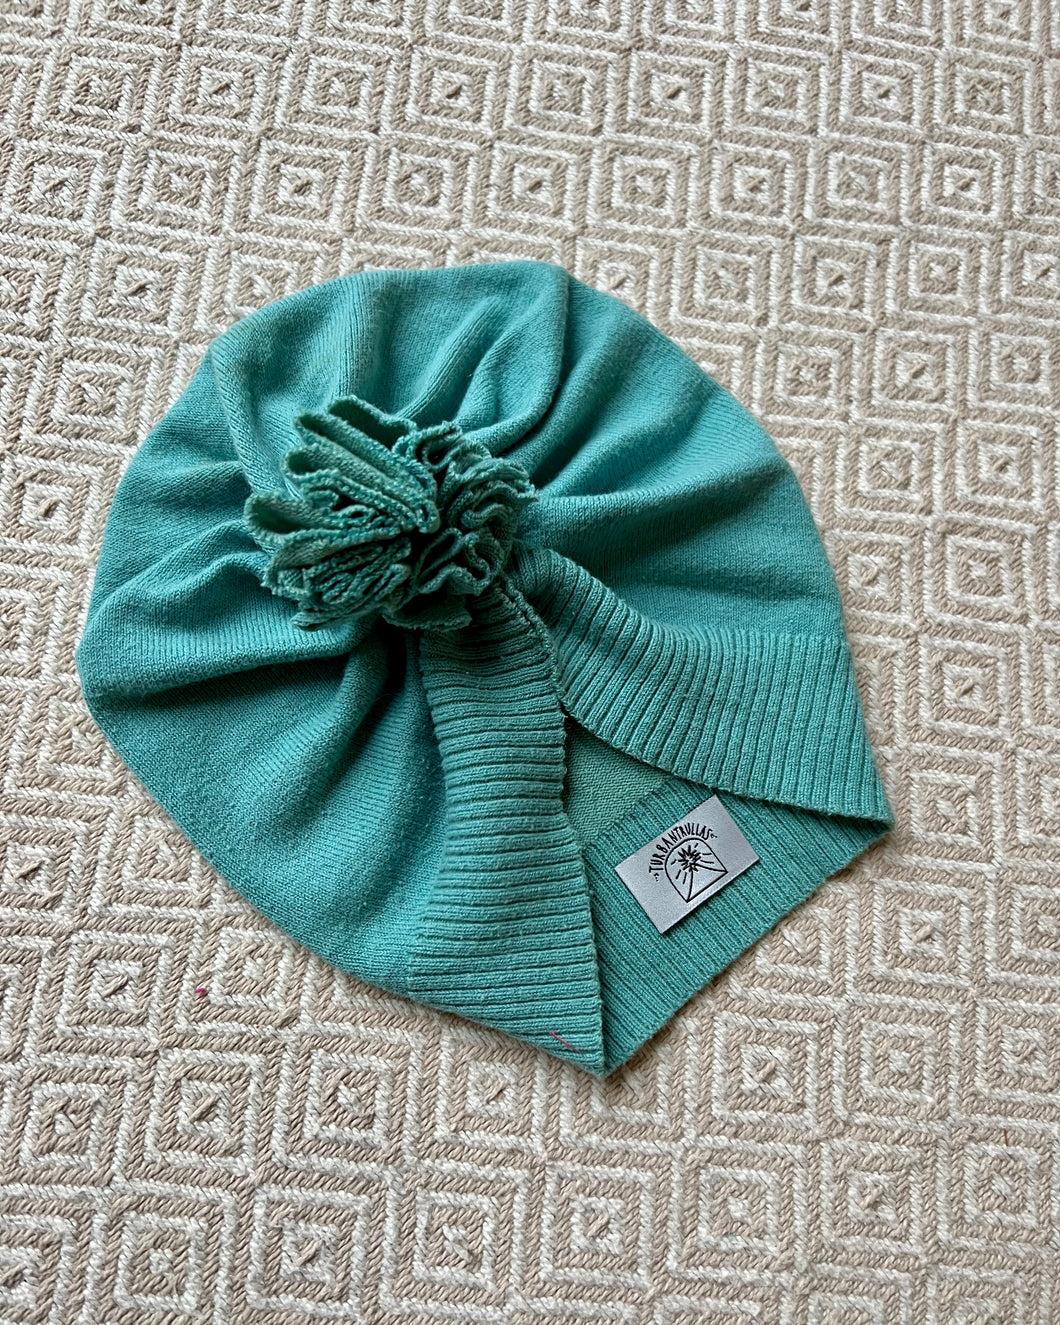 Baby turbans 3 to 6 months // Spring & Summer